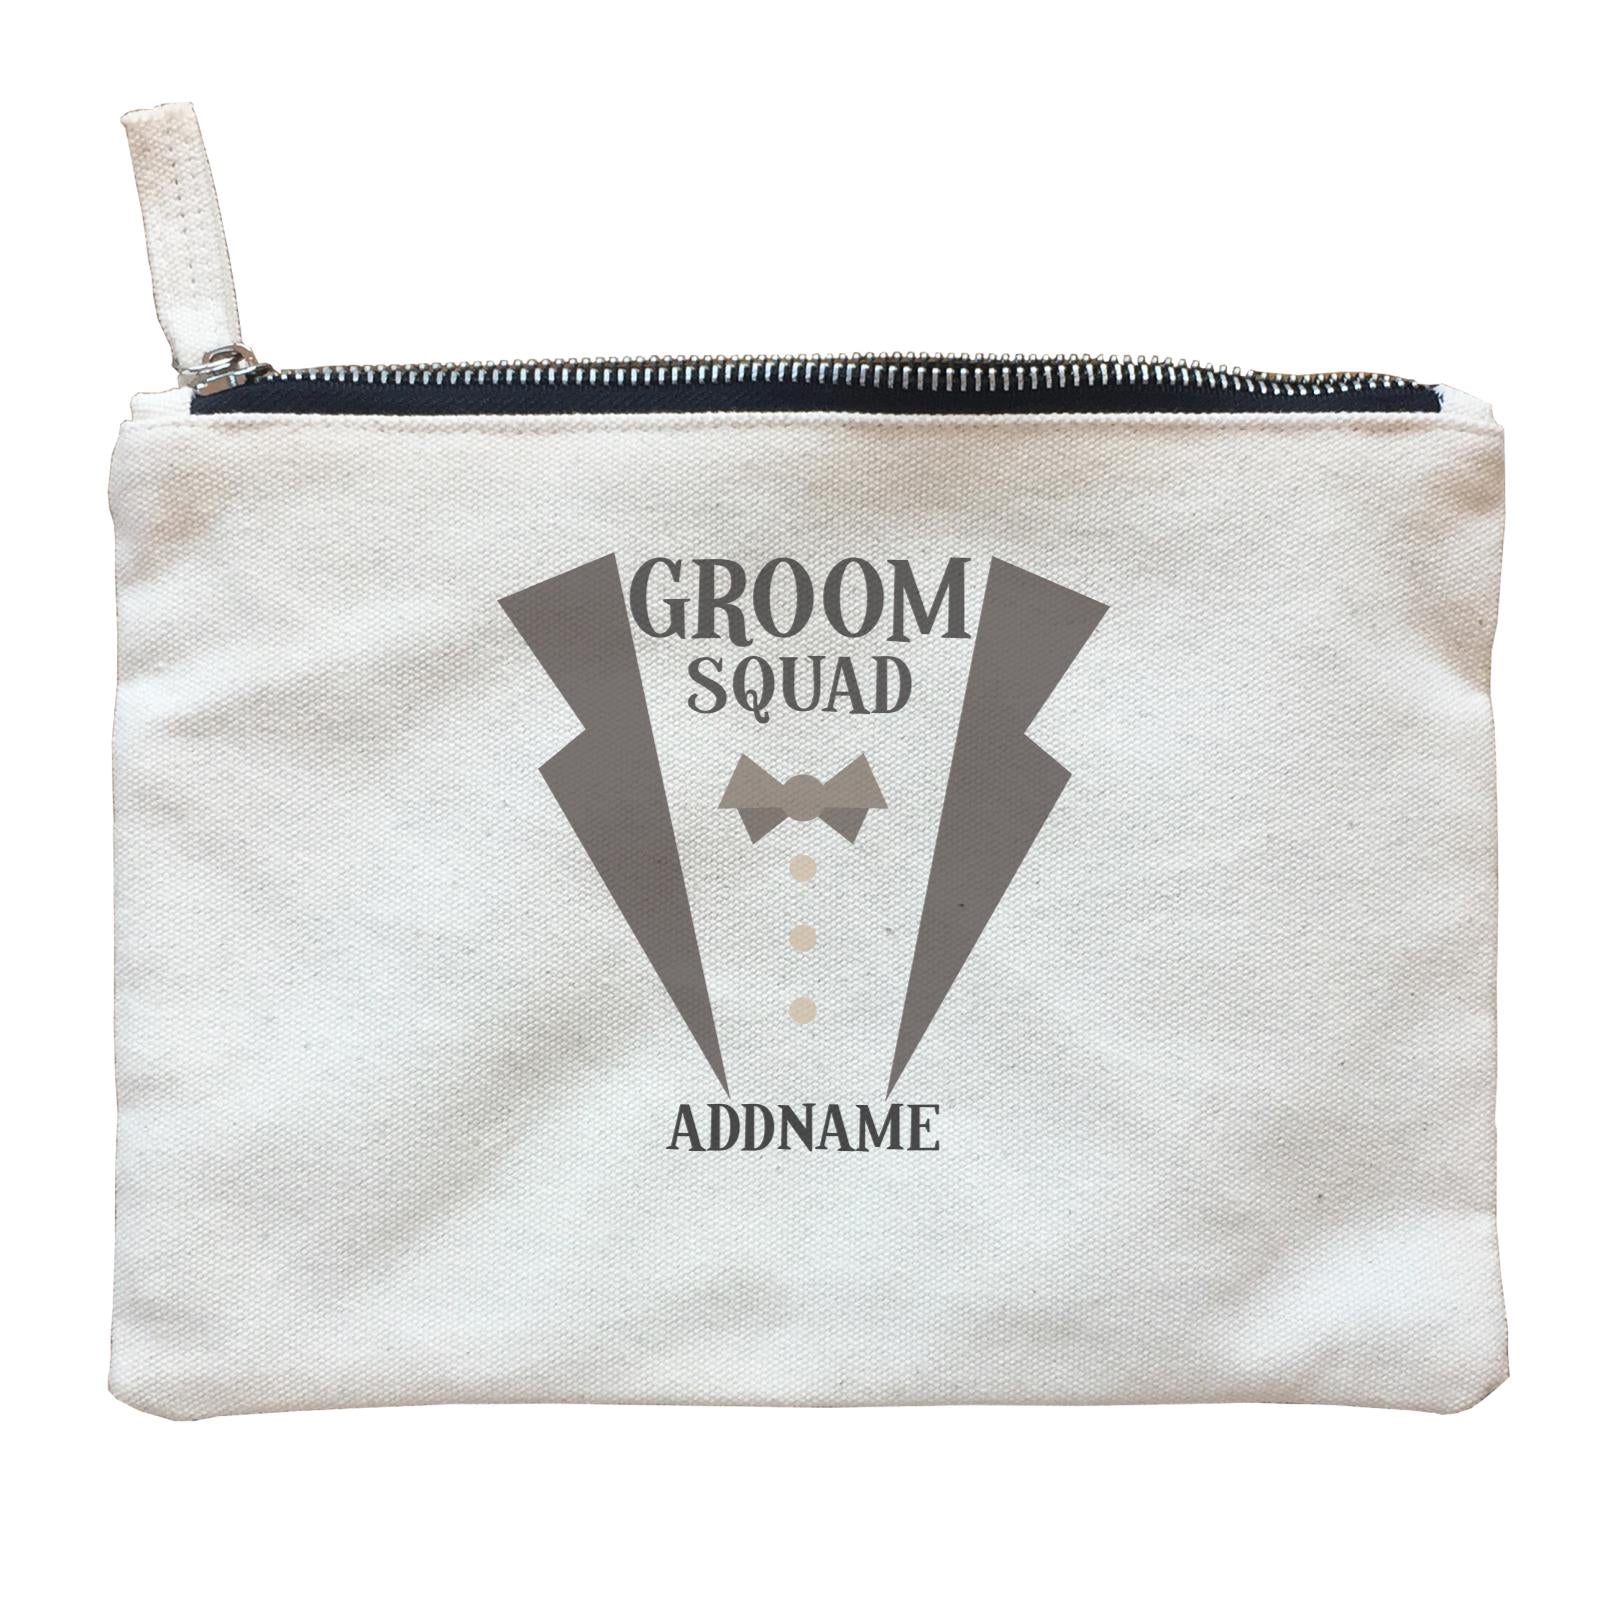 Wedding Couple Western Groom Squad Addname Zipper Pouch